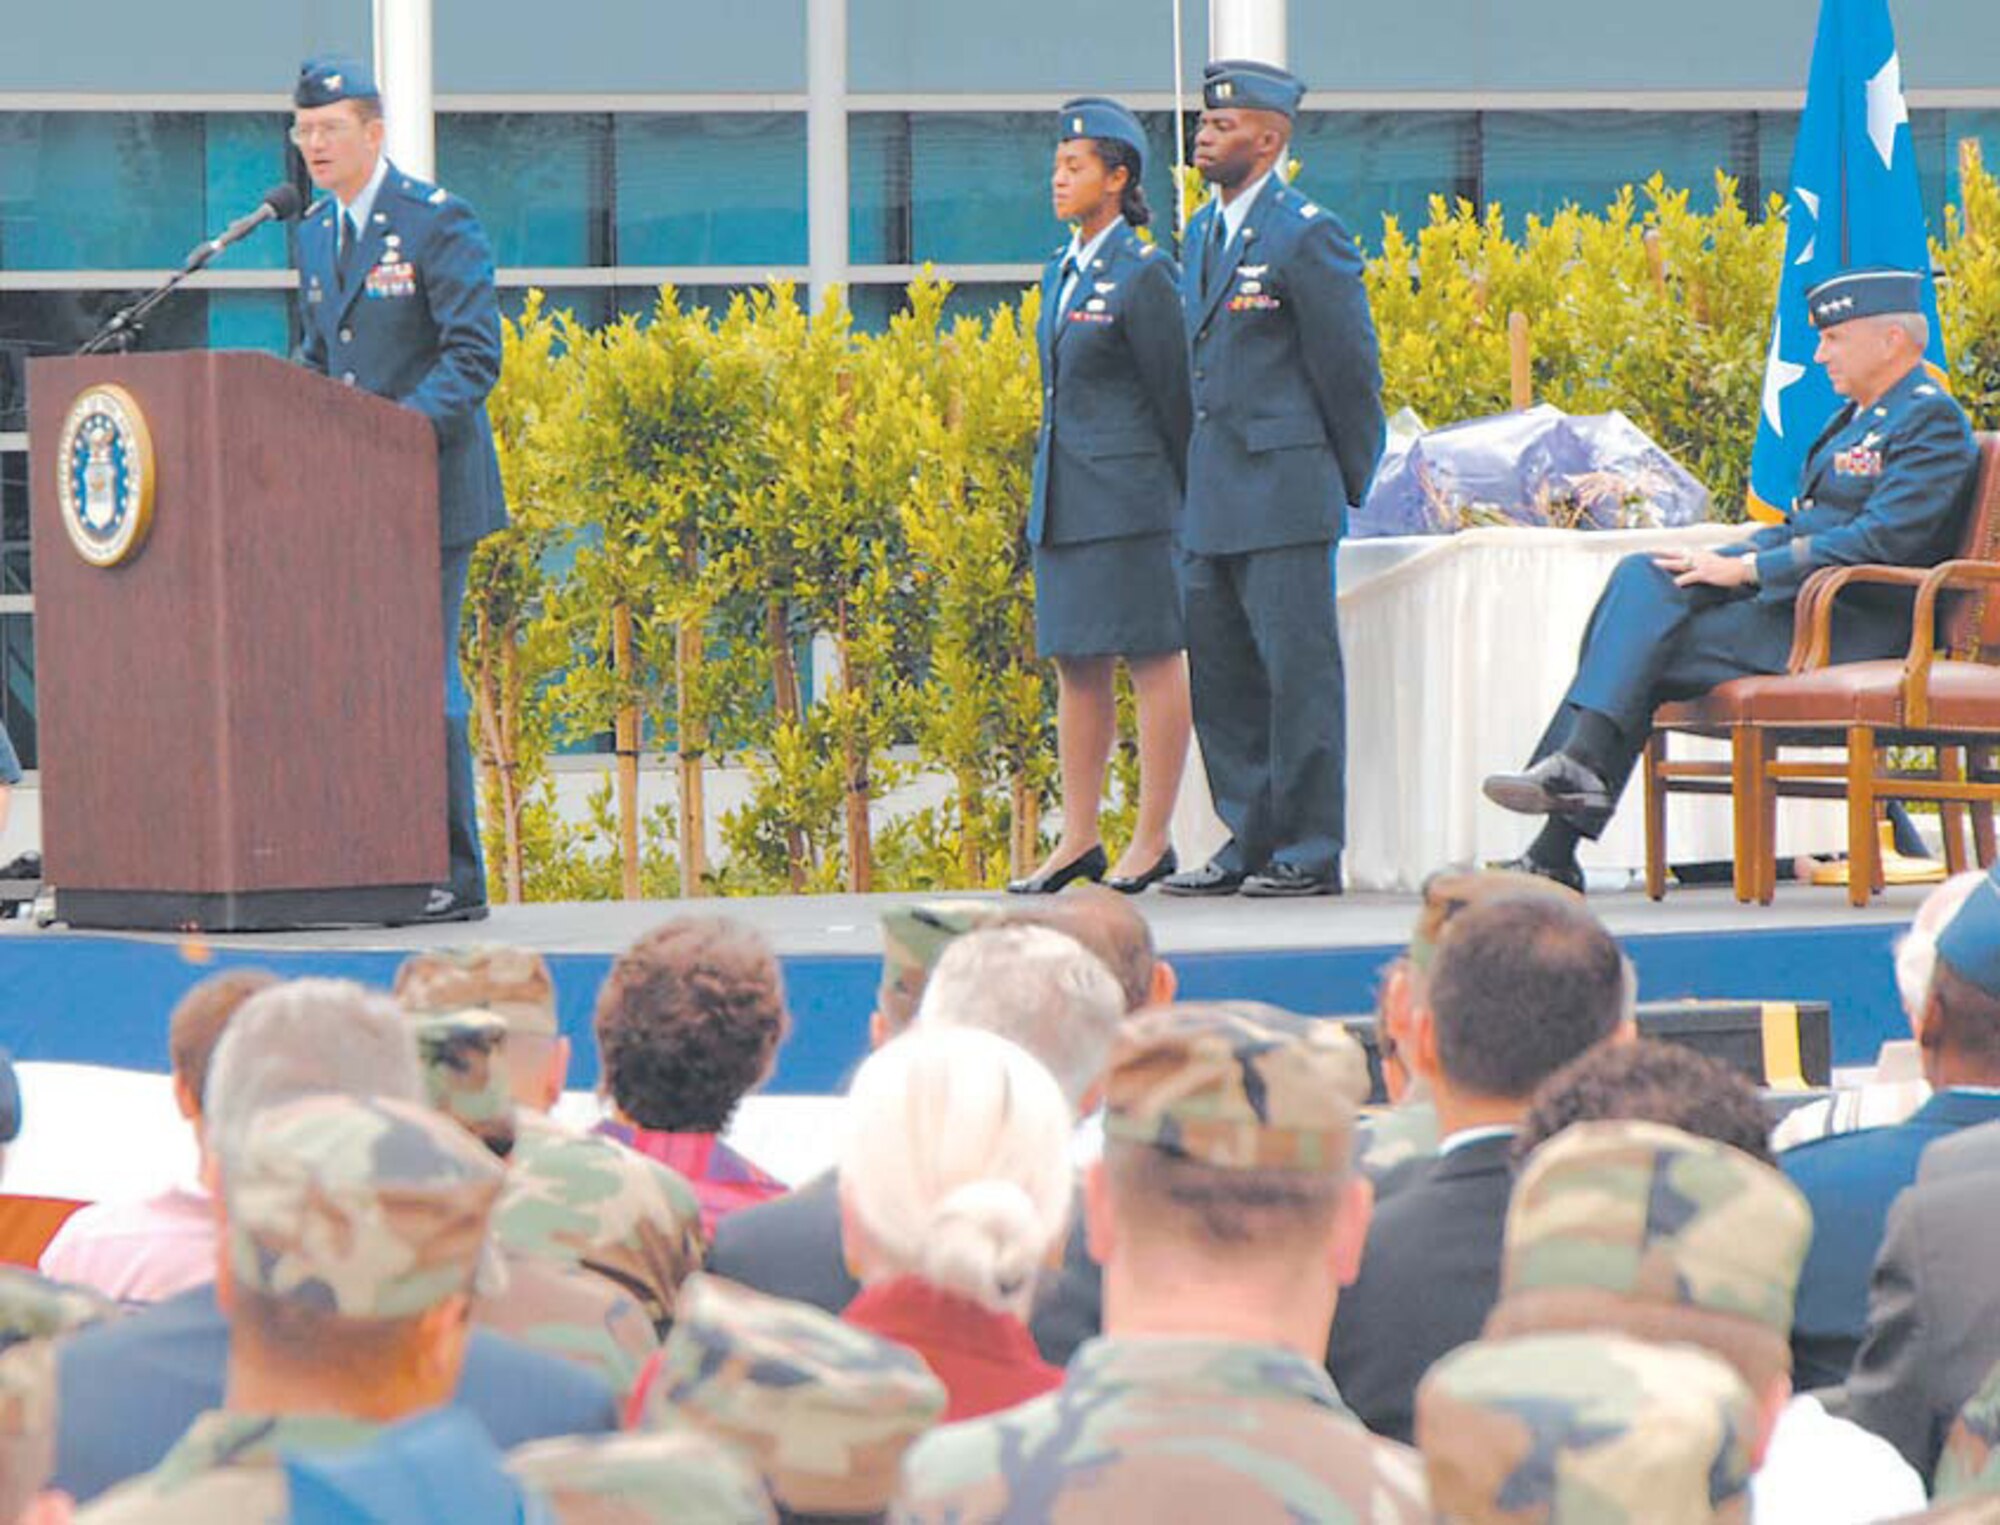 Col. Joe Schwarz, 61st Air Base Wing commander addresses the crowd during the SMC Wing standup. Lt. Gen. Michael Hamel, SMC commander (seated right), headed the historical ceremony at the Schriever Space Complex, July 31.